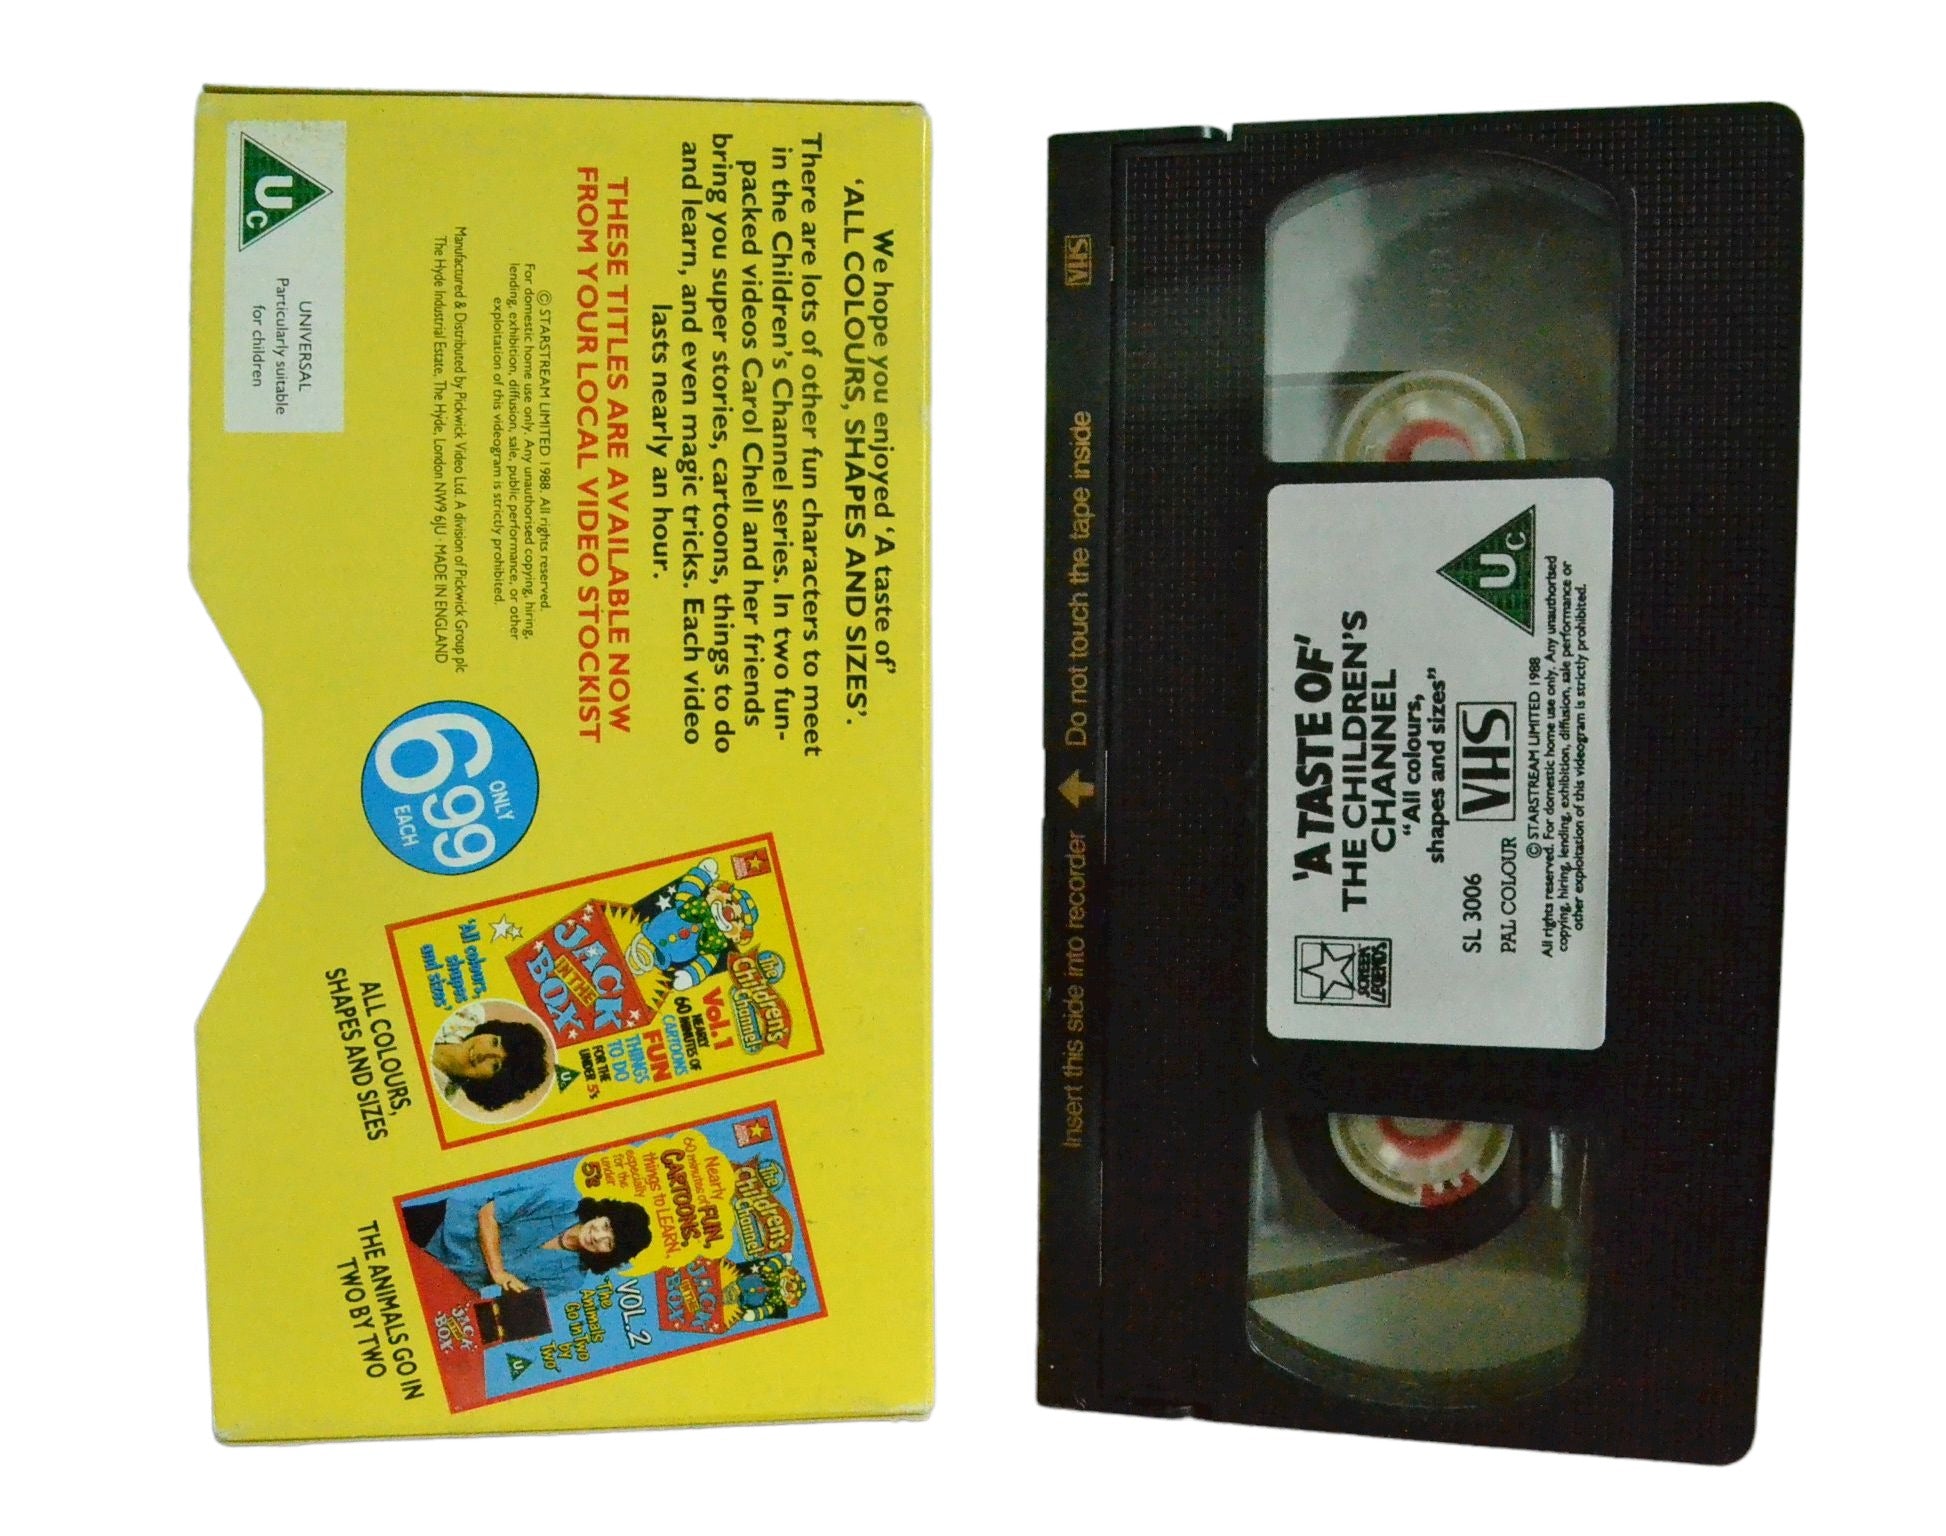 A Taste Of' - The Children's Channel "All colours, shape and sizes" - Screen Legends - Carton Box - Pal VHS-